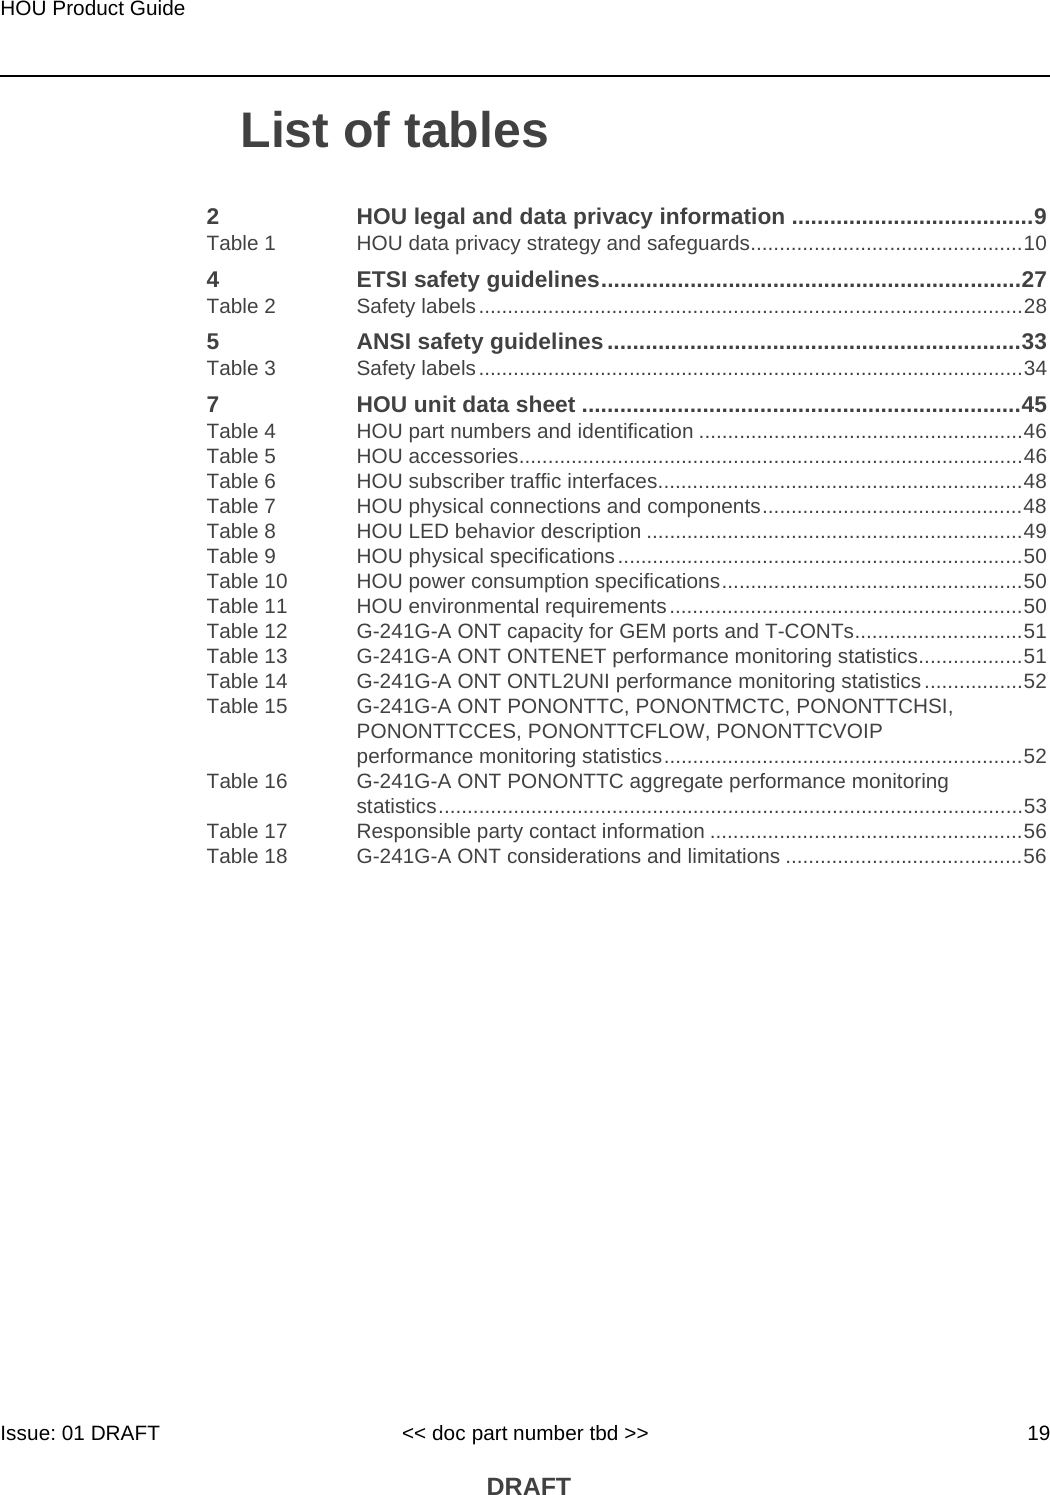 HOU Product GuideIssue: 01 DRAFT &lt;&lt; doc part number tbd &gt;&gt; 19 DRAFTList of tables2 HOU legal and data privacy information ......................................9Table 1 HOU data privacy strategy and safeguards...............................................104 ETSI safety guidelines..................................................................27Table 2 Safety labels..............................................................................................285 ANSI safety guidelines .................................................................33Table 3 Safety labels..............................................................................................347 HOU unit data sheet .....................................................................45Table 4 HOU part numbers and identification ........................................................46Table 5 HOU accessories.......................................................................................46Table 6 HOU subscriber traffic interfaces...............................................................48Table 7 HOU physical connections and components.............................................48Table 8 HOU LED behavior description .................................................................49Table 9 HOU physical specifications......................................................................50Table 10 HOU power consumption specifications....................................................50Table 11 HOU environmental requirements.............................................................50Table 12 G-241G-A ONT capacity for GEM ports and T-CONTs.............................51Table 13 G-241G-A ONT ONTENET performance monitoring statistics..................51Table 14 G-241G-A ONT ONTL2UNI performance monitoring statistics.................52Table 15 G-241G-A ONT PONONTTC, PONONTMCTC, PONONTTCHSI, PONONTTCCES, PONONTTCFLOW, PONONTTCVOIP performance monitoring statistics..............................................................52Table 16 G-241G-A ONT PONONTTC aggregate performance monitoring statistics.....................................................................................................53Table 17 Responsible party contact information ......................................................56Table 18 G-241G-A ONT considerations and limitations .........................................56